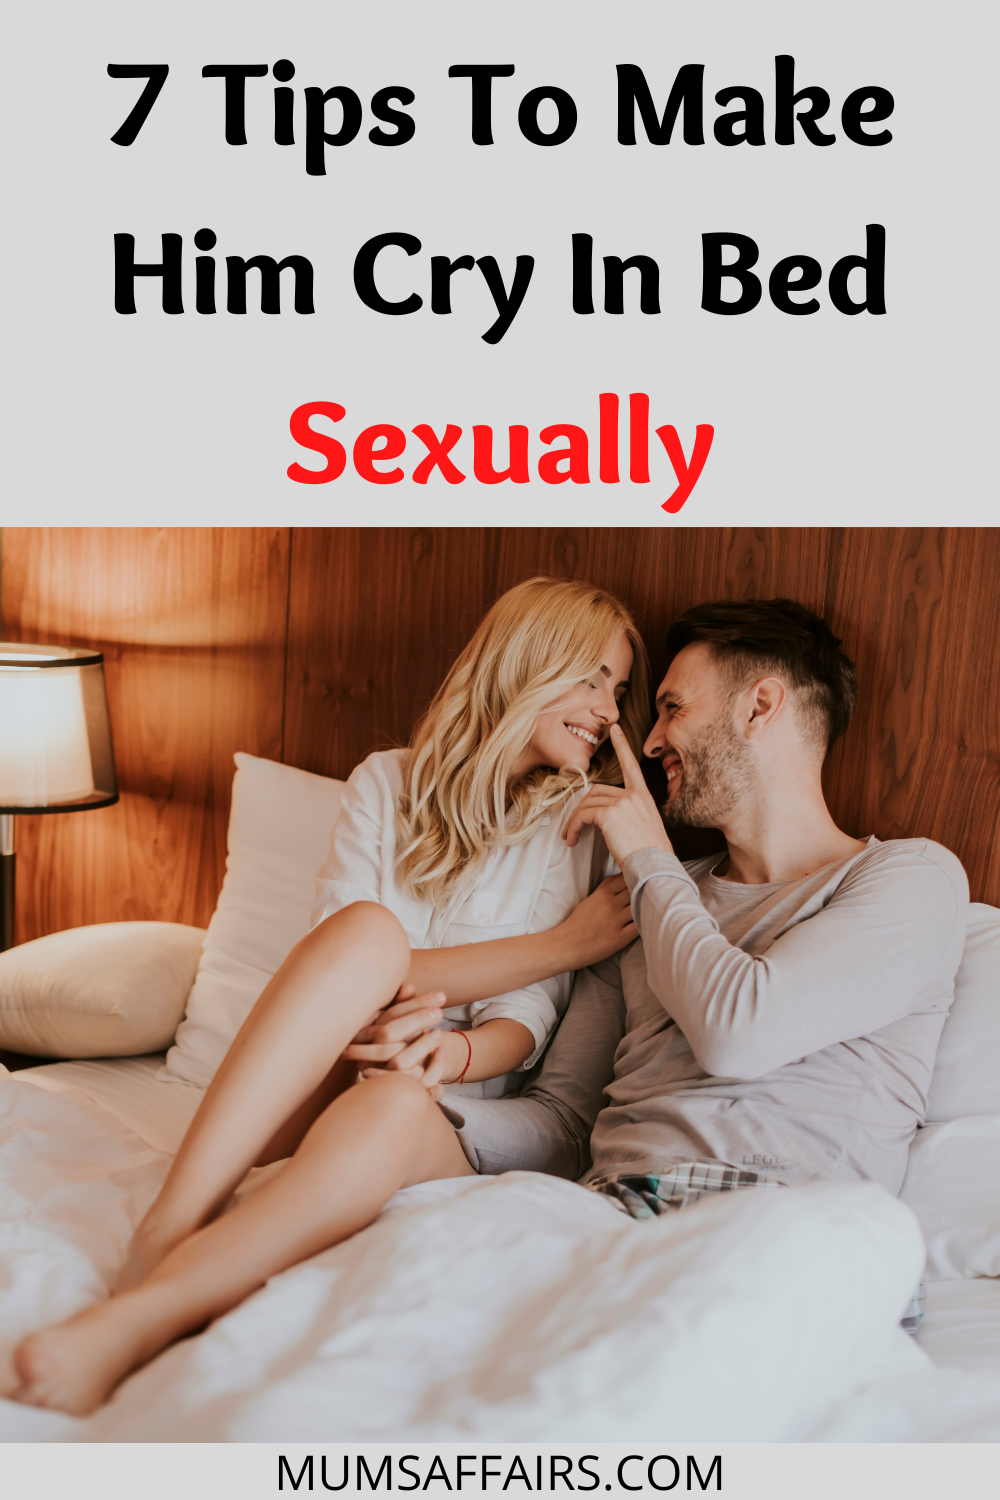  Tips To Make Him Cry In Bed Sexually